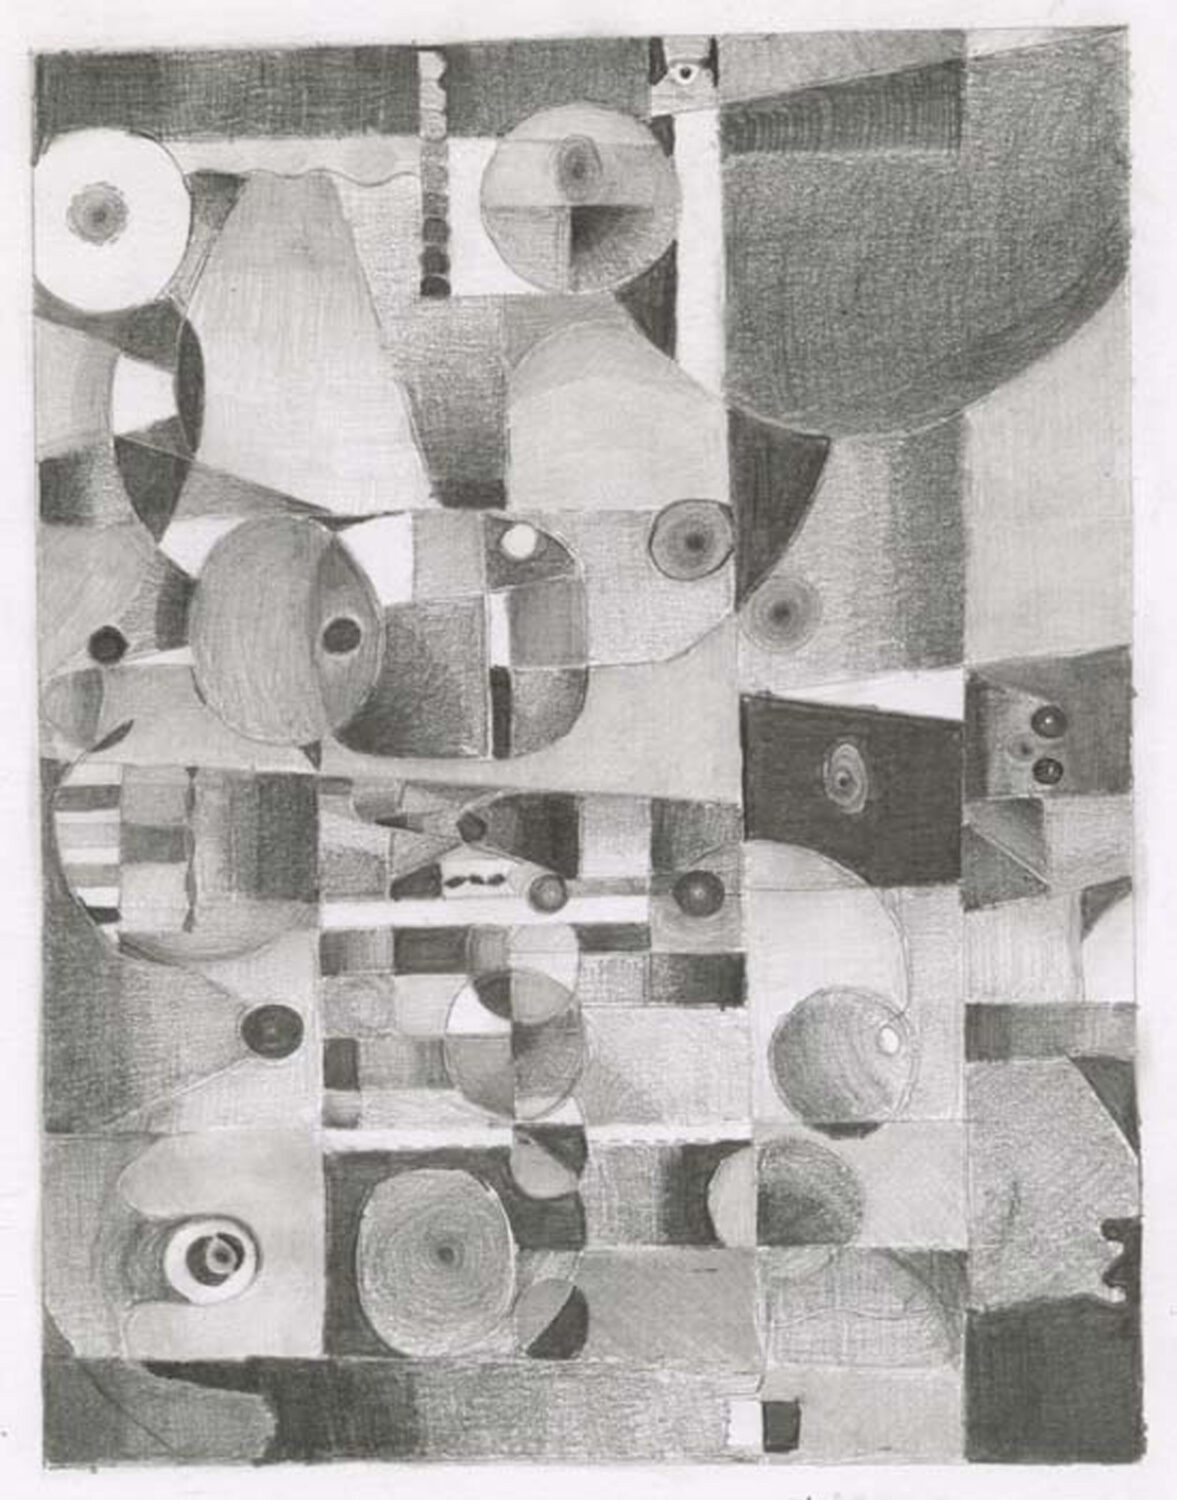 thumbnail of Graphite on paper by Alejandro Ordoñez titled Urban Abstraction.